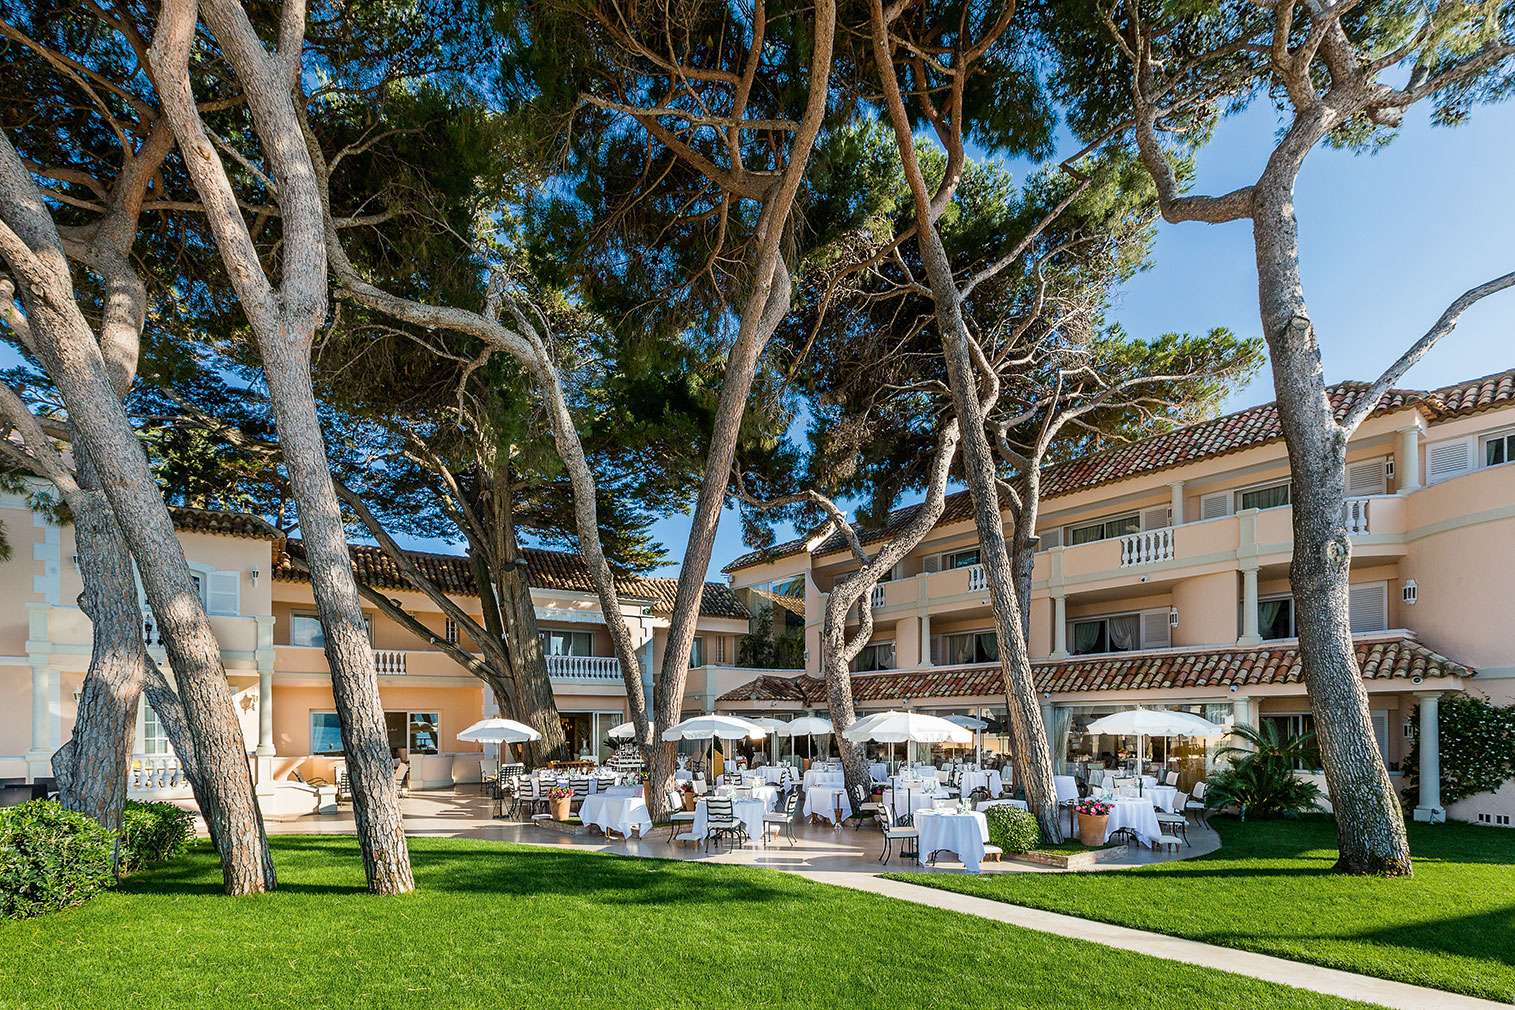 Cheval Blanc is a French Riviera hideaway with classic bones and modernist interiors